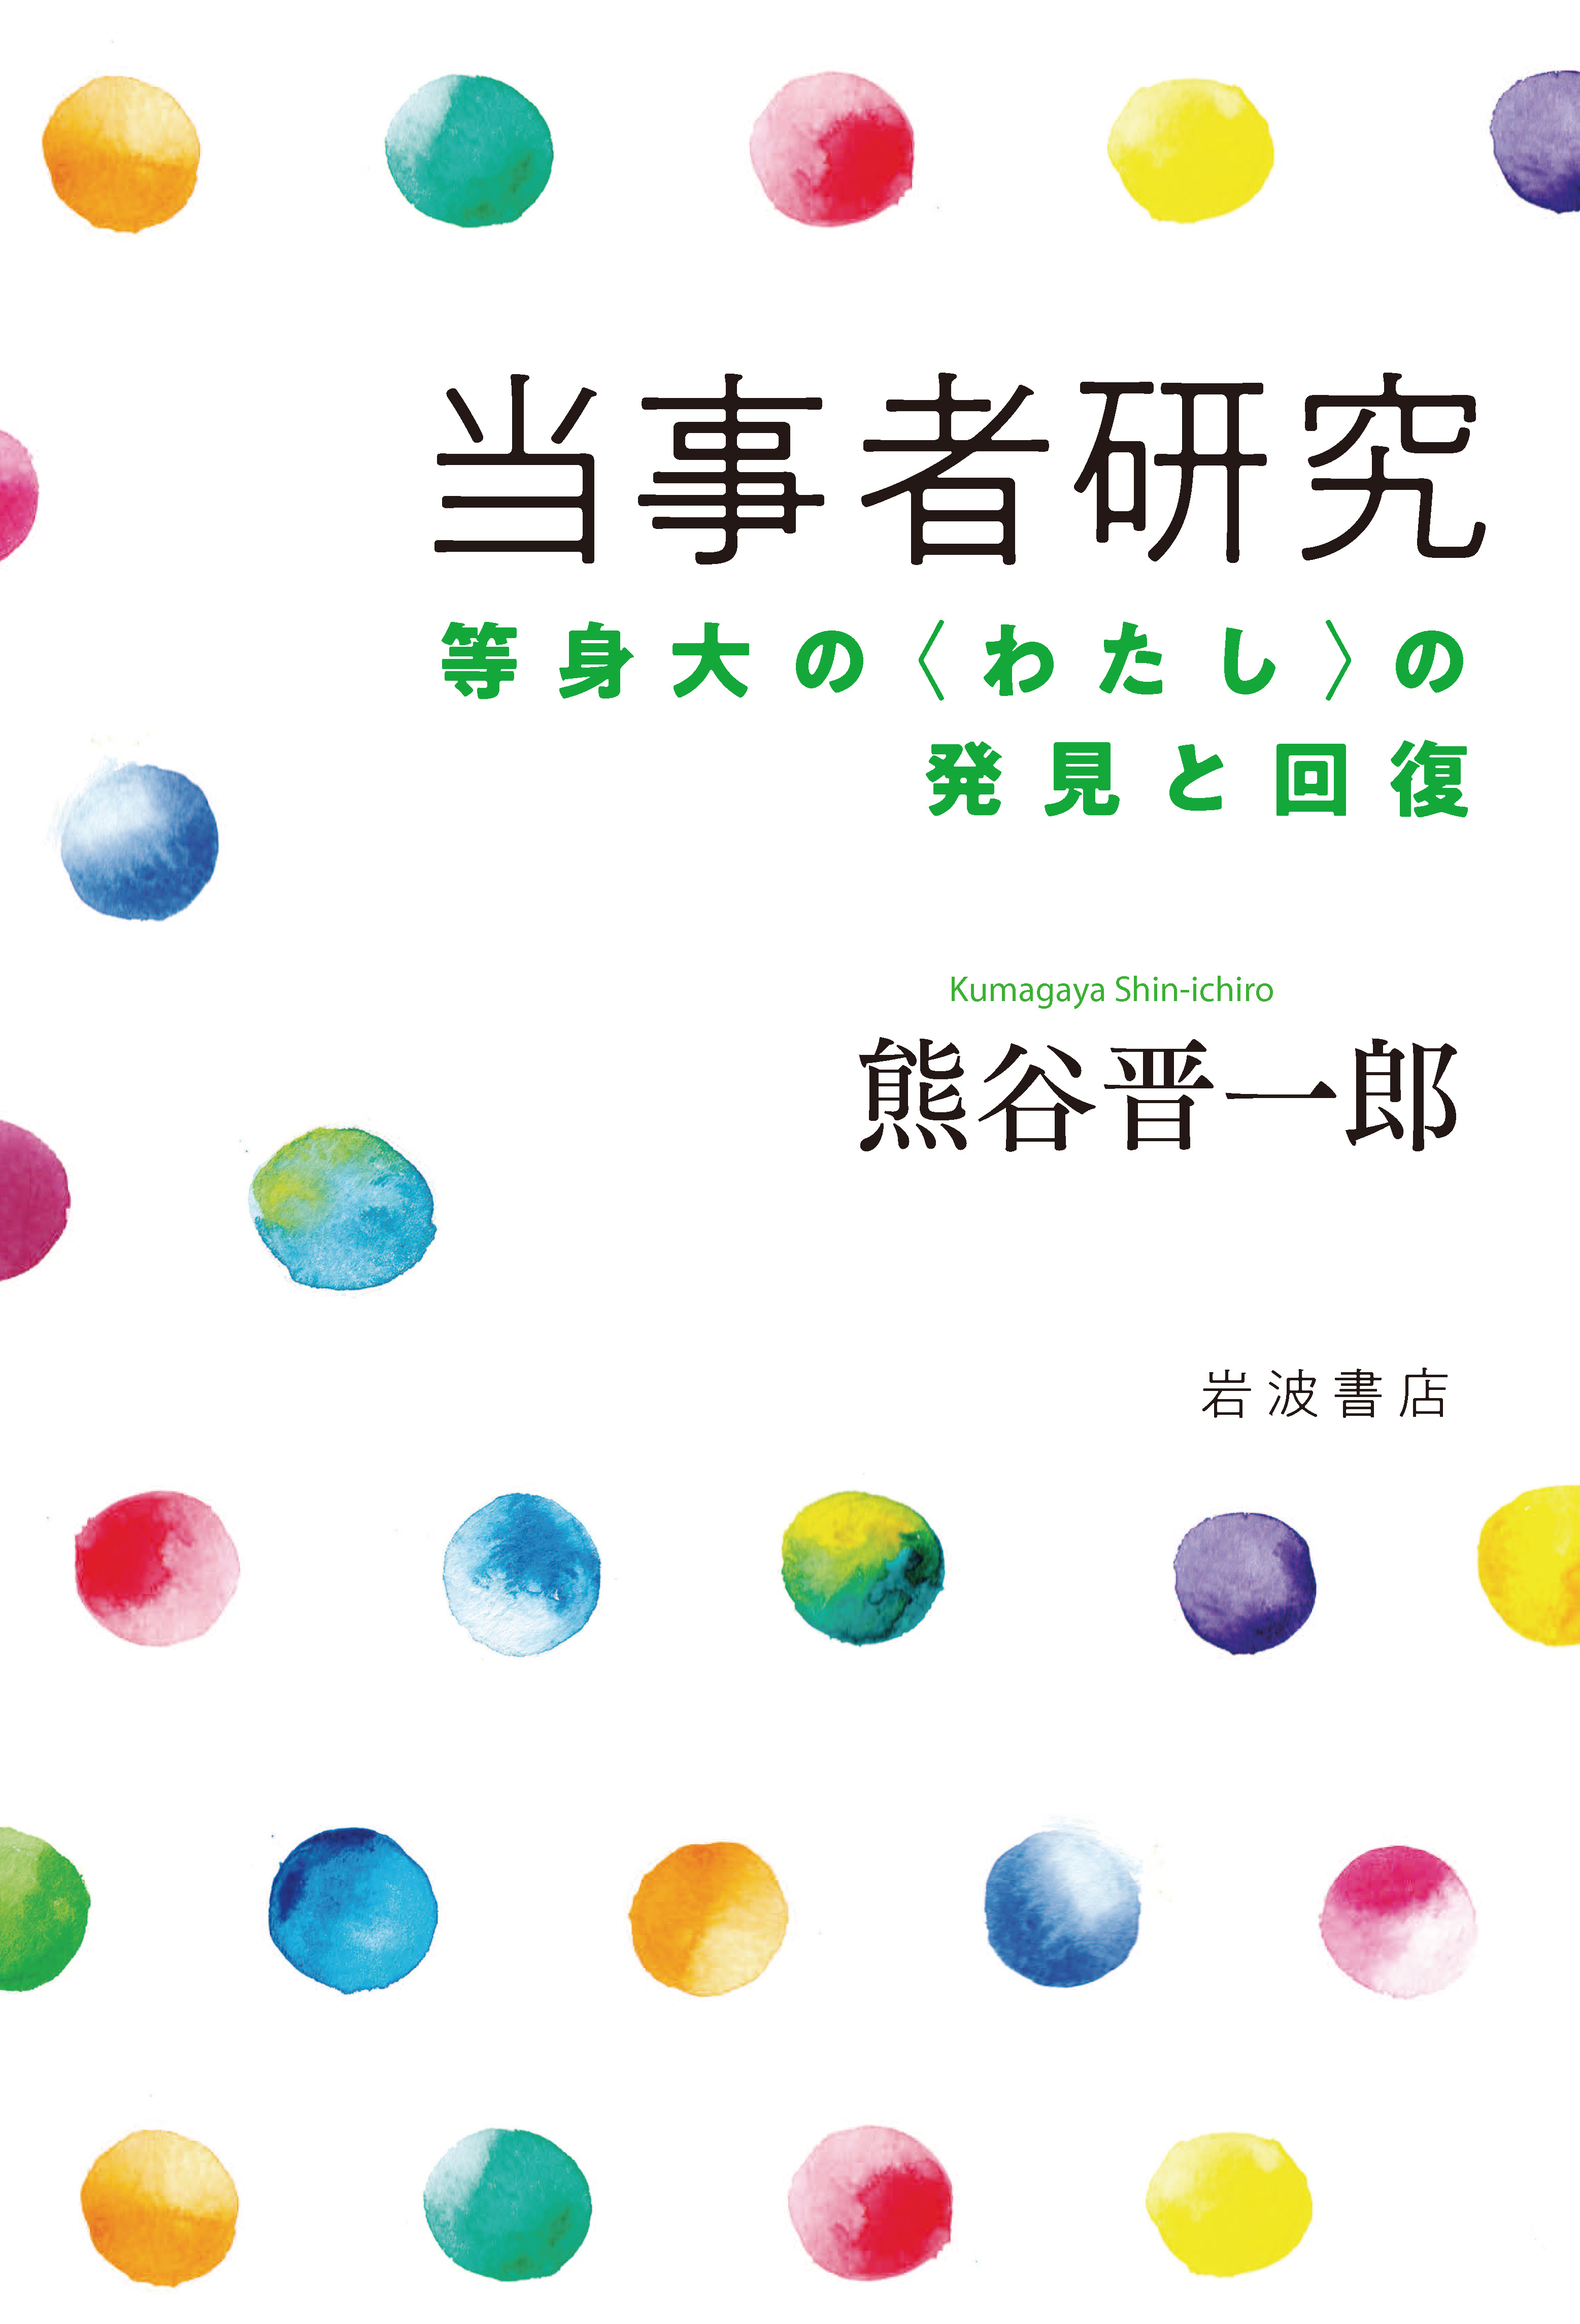 A cover with colorful dot elements